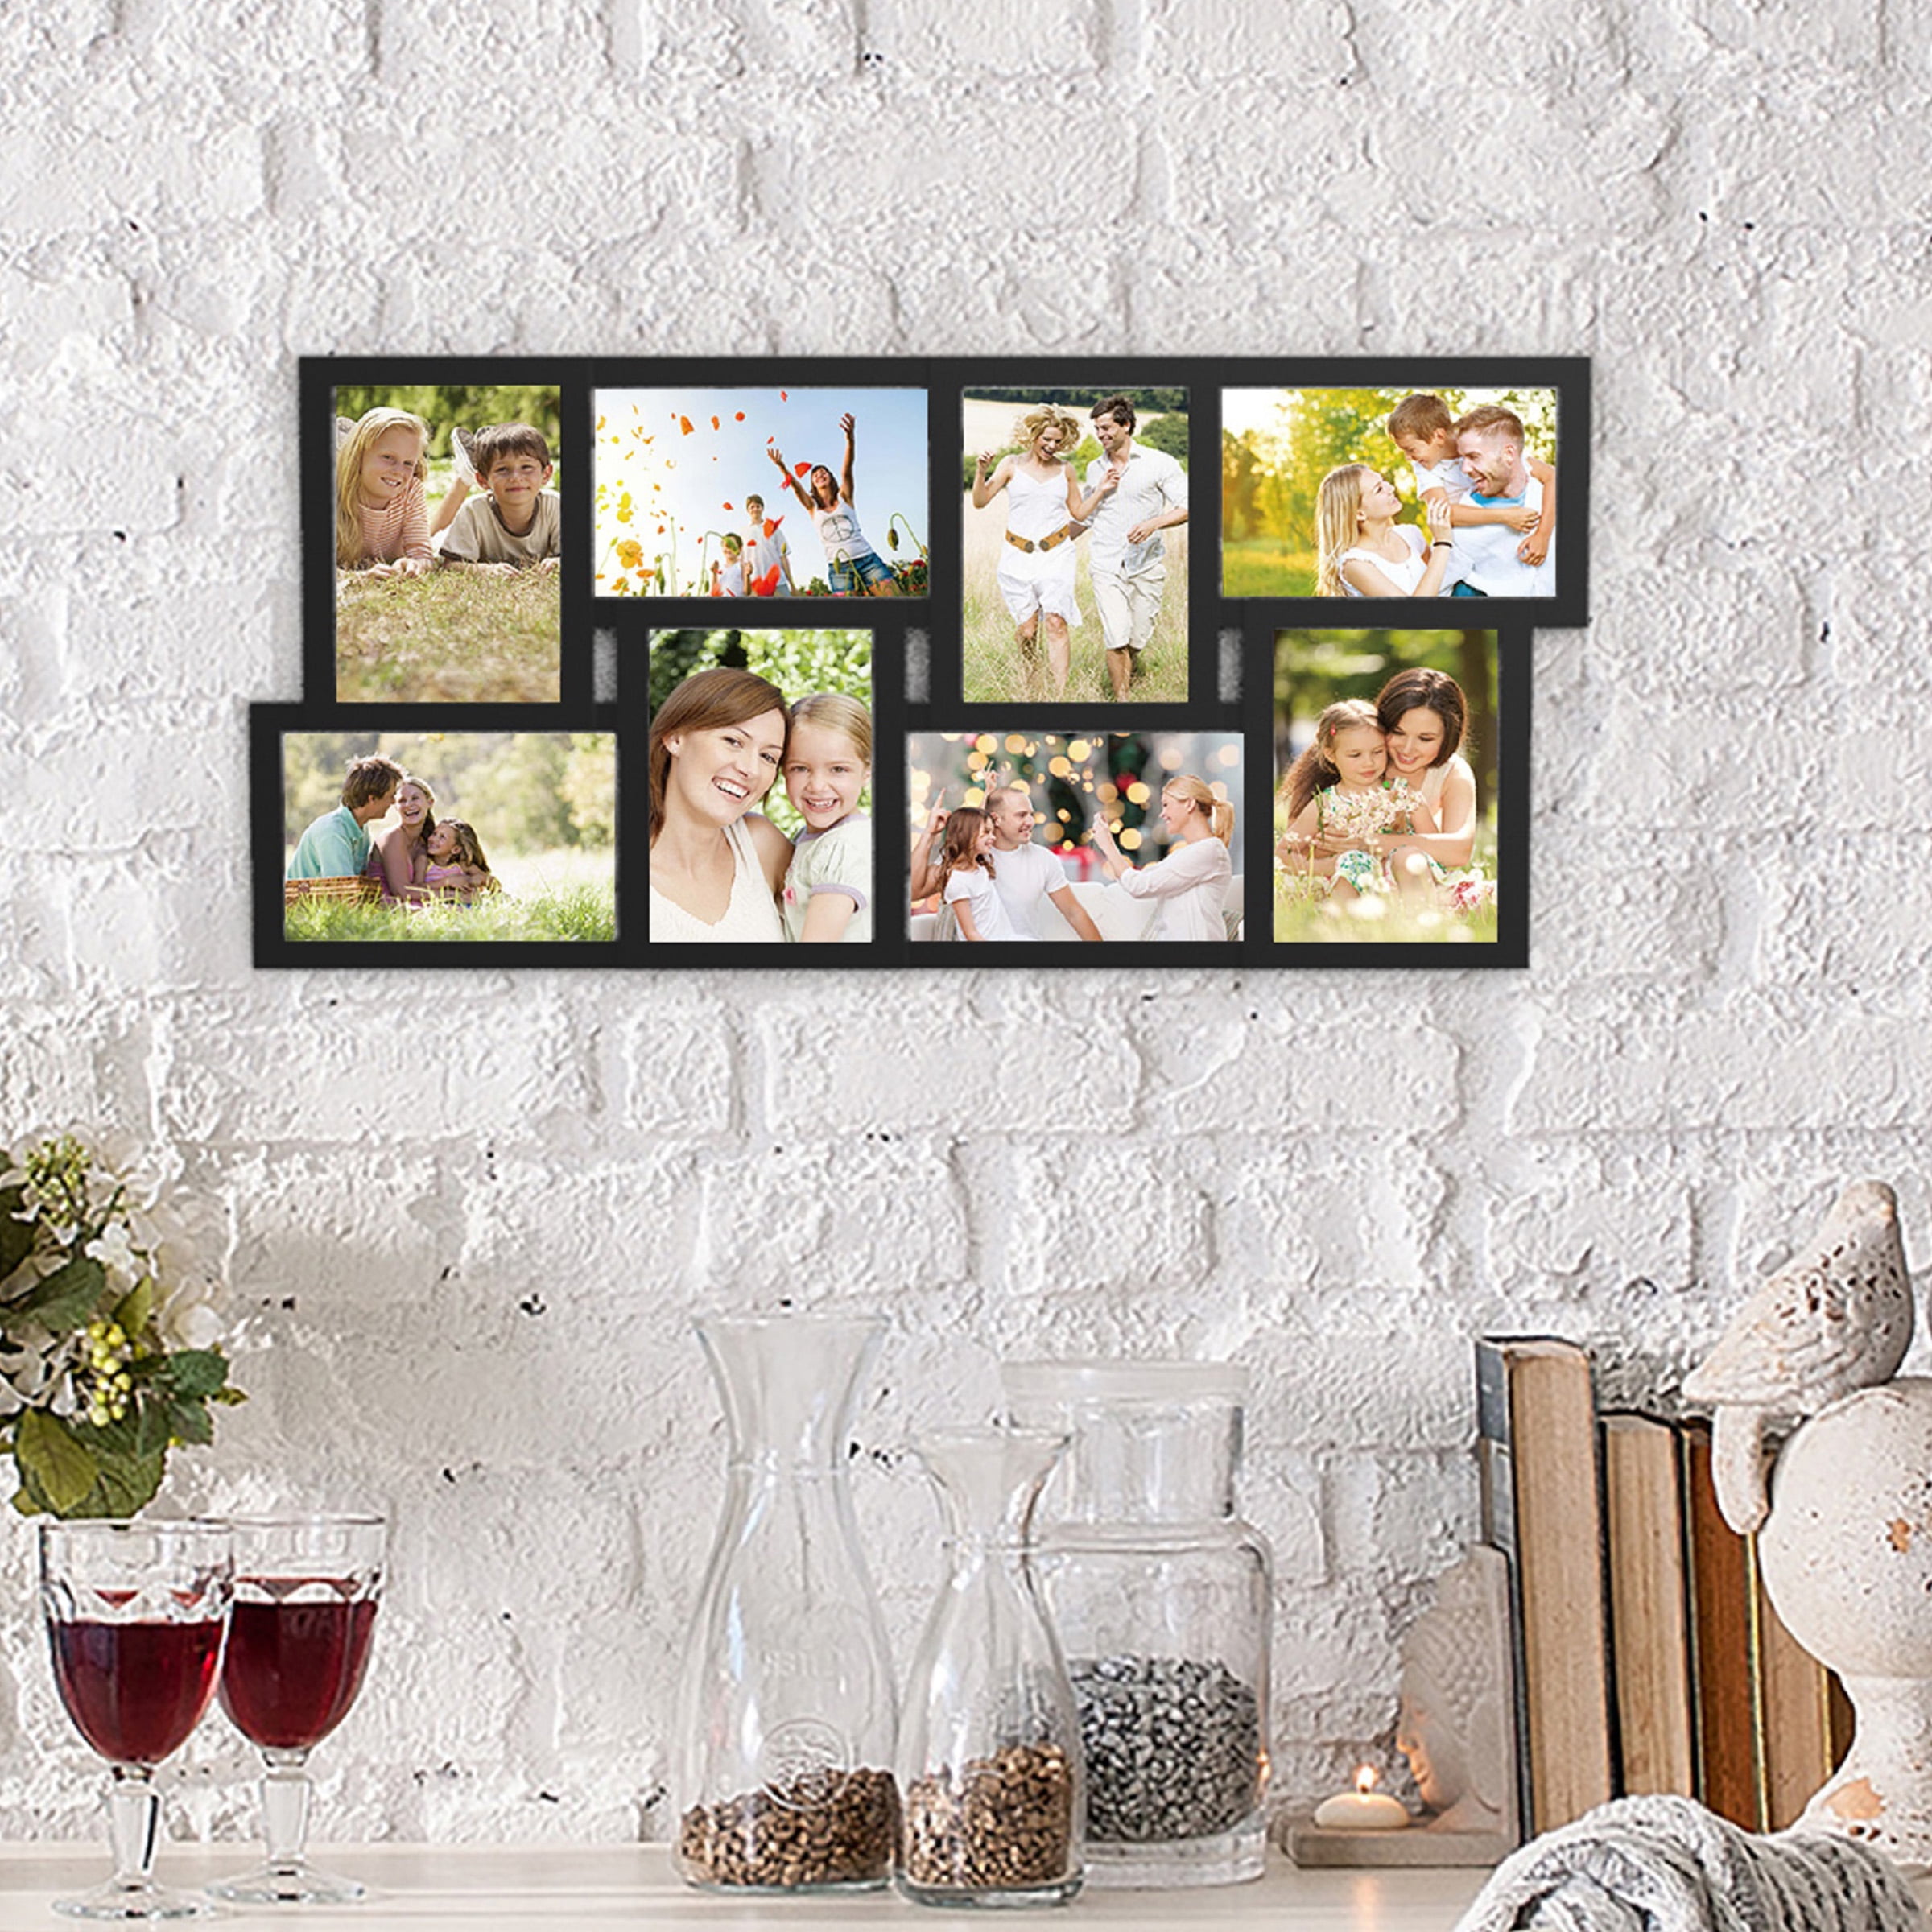 Crossroads Home Décor Picture Frame Set, Multi Pack, 2-4x10, for Instagram  Photo Wall Gallery with Glass Picture Frame, Use for Picture Frames Collage